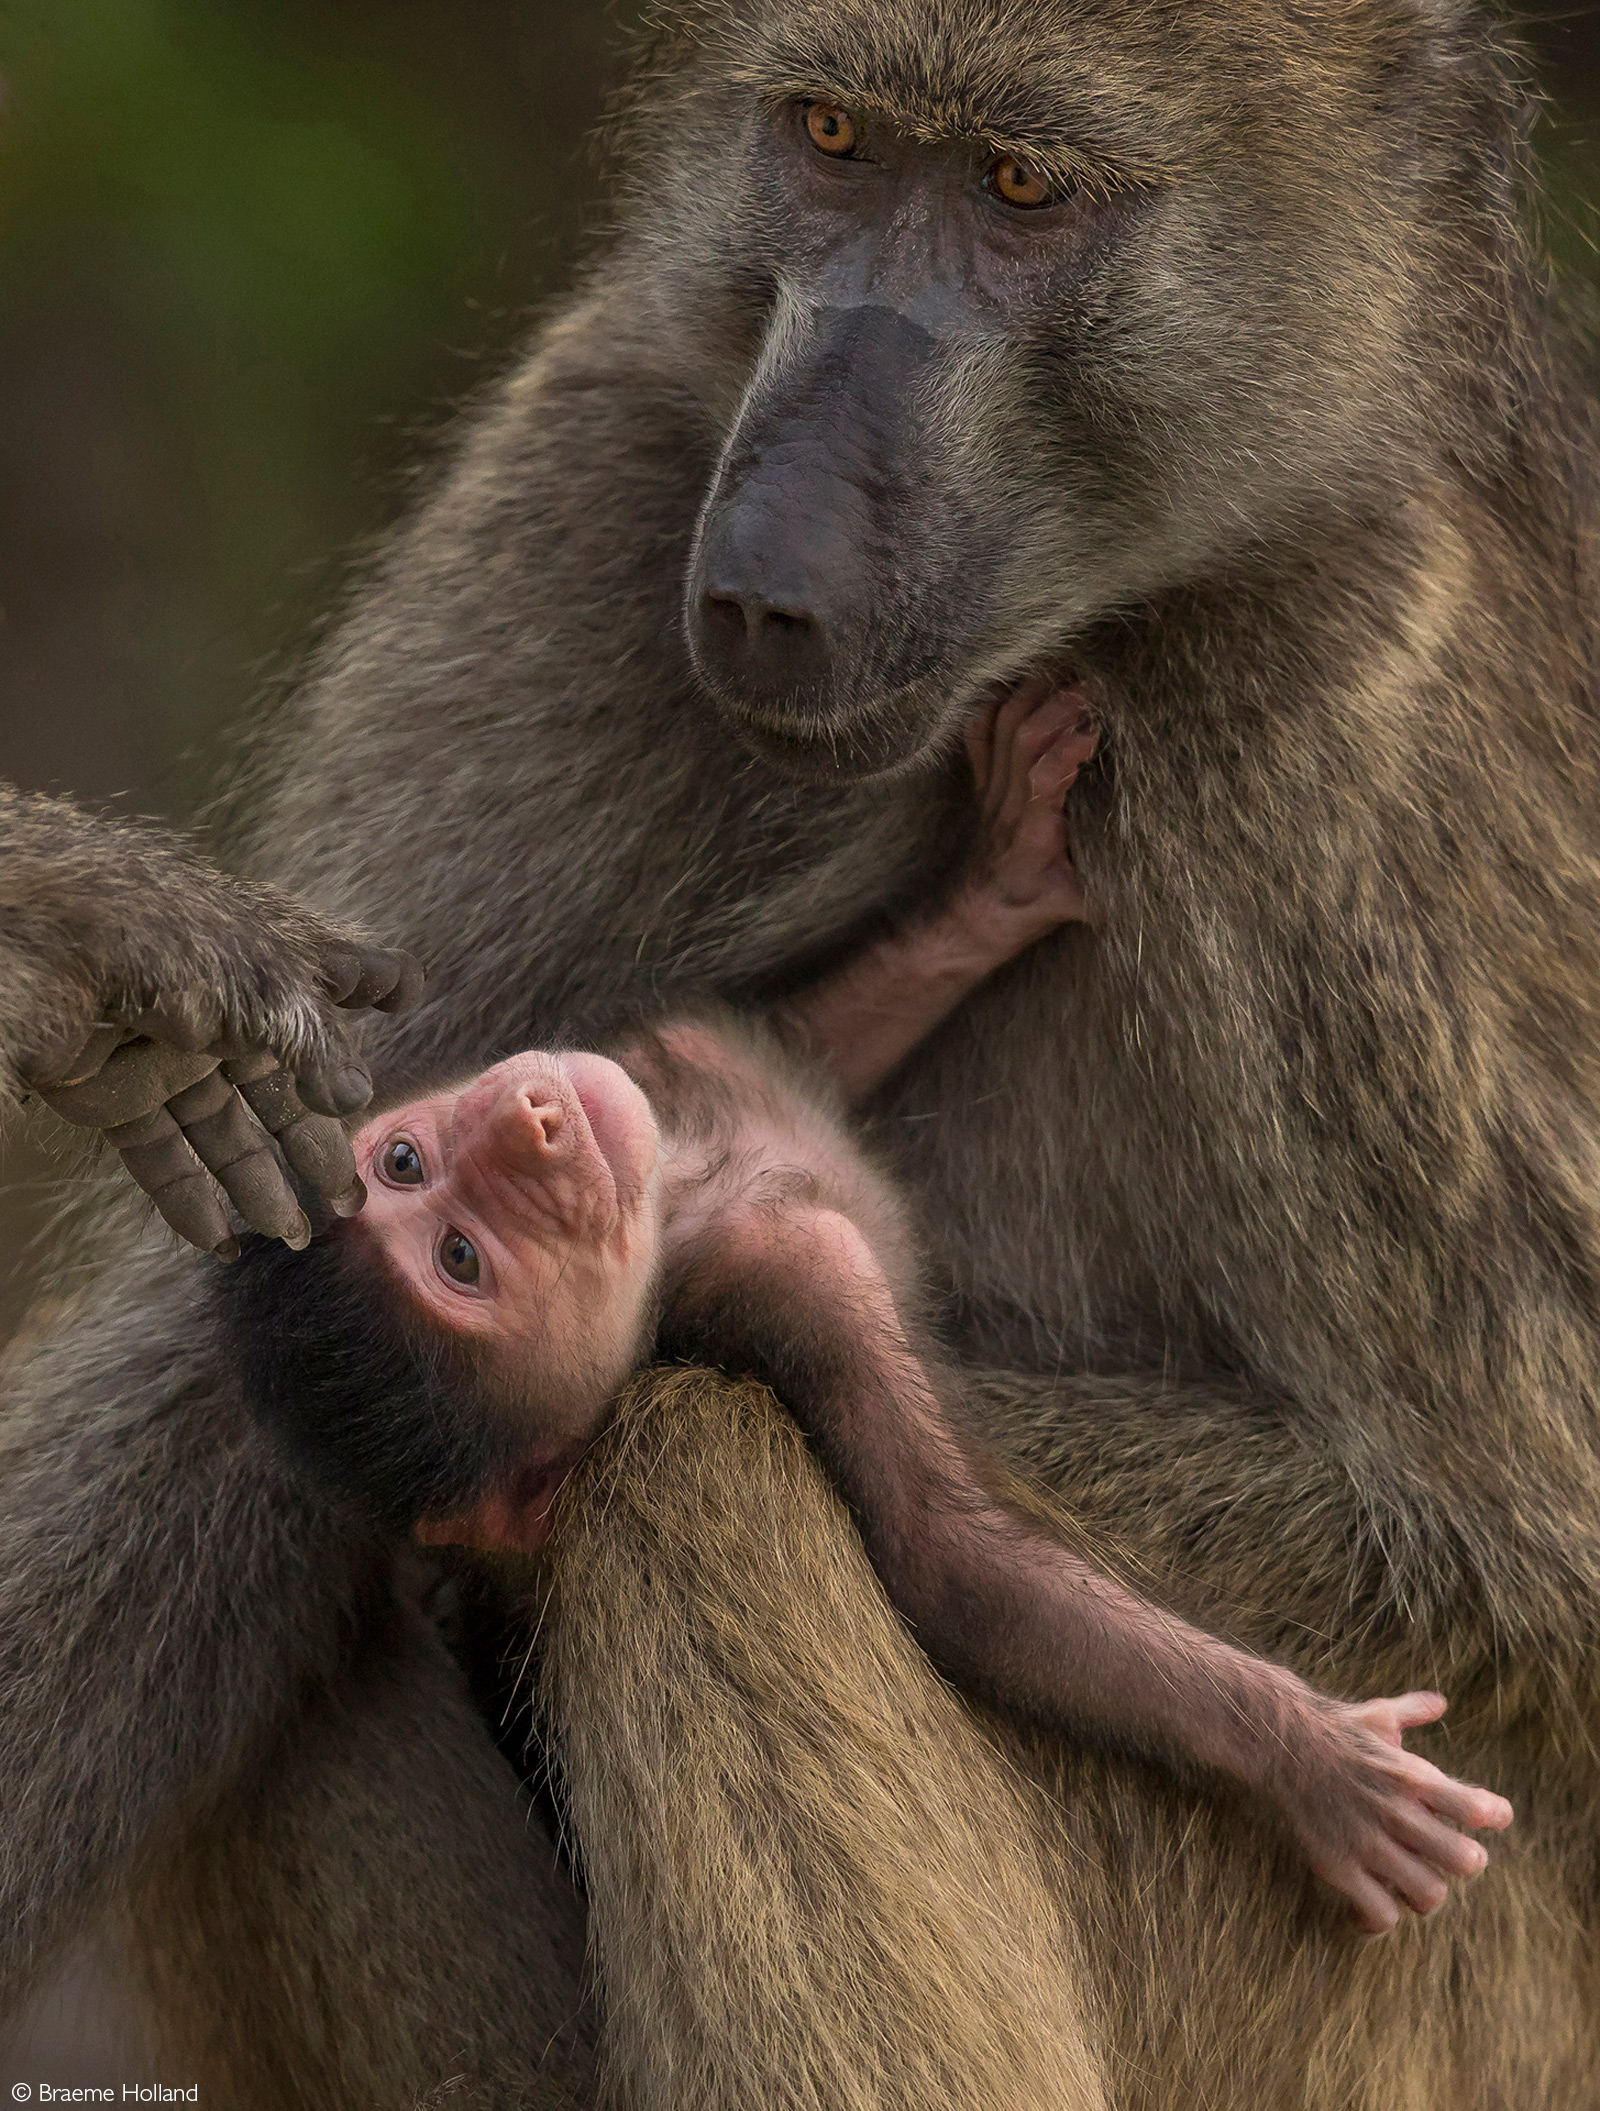 A mother baboon looks protectingly over her baby as another adult endeavours to gently touch the young one. Chobe River, Botswana © Braeme Holland